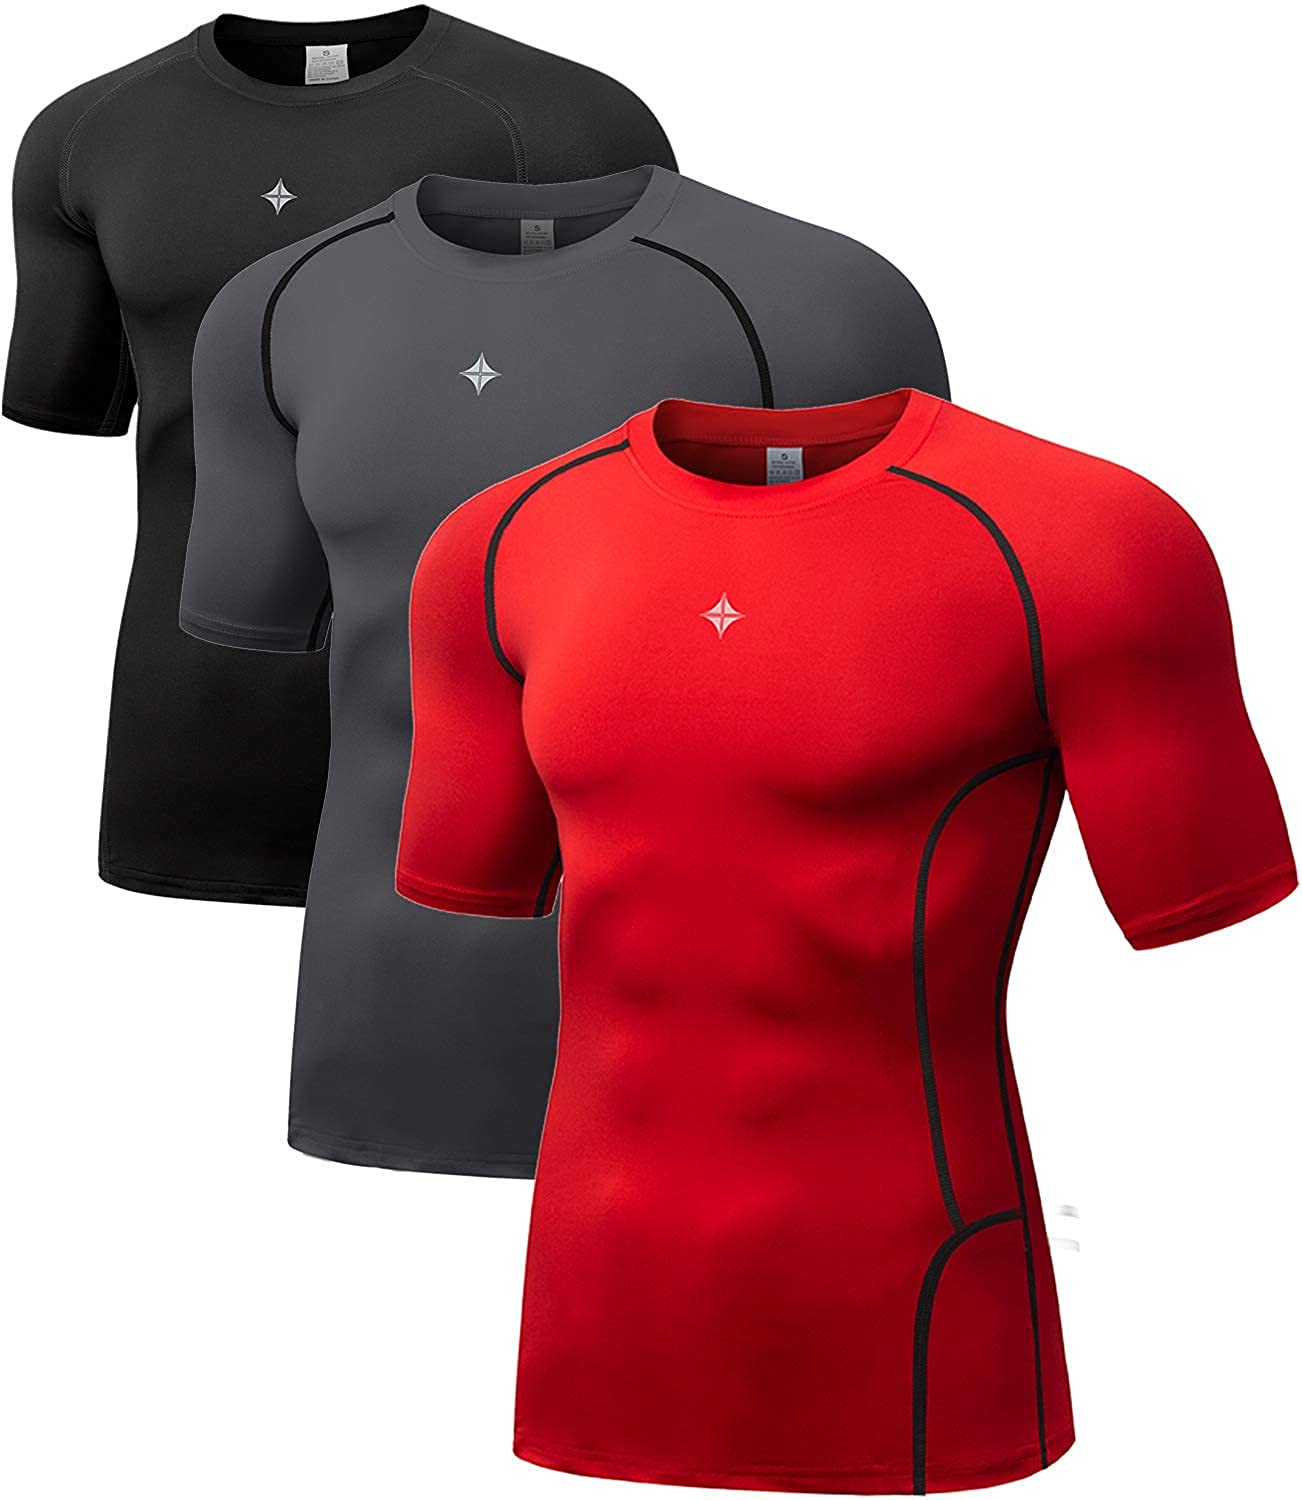 Cool Dry Undershirt Baselayer Tops for Men Pack of 1,2,3 Milin Naco Men's Short Sleeve Compression T-Shirt 